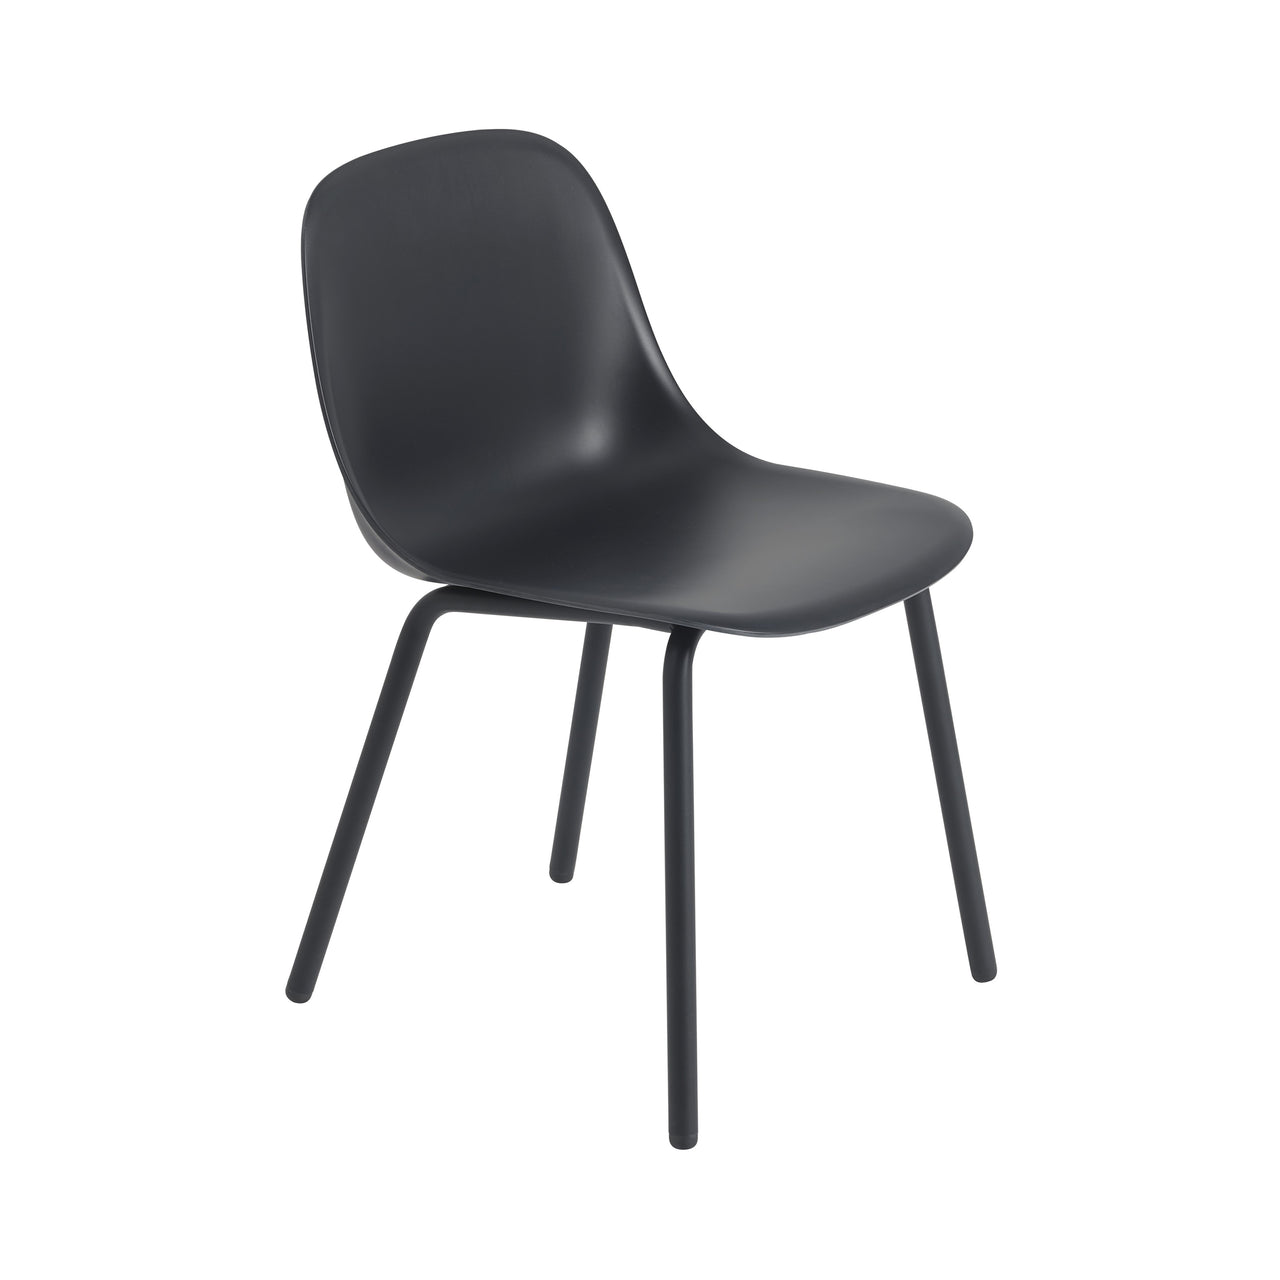 Fiber Outdoor Side Chair: Anthracite Black